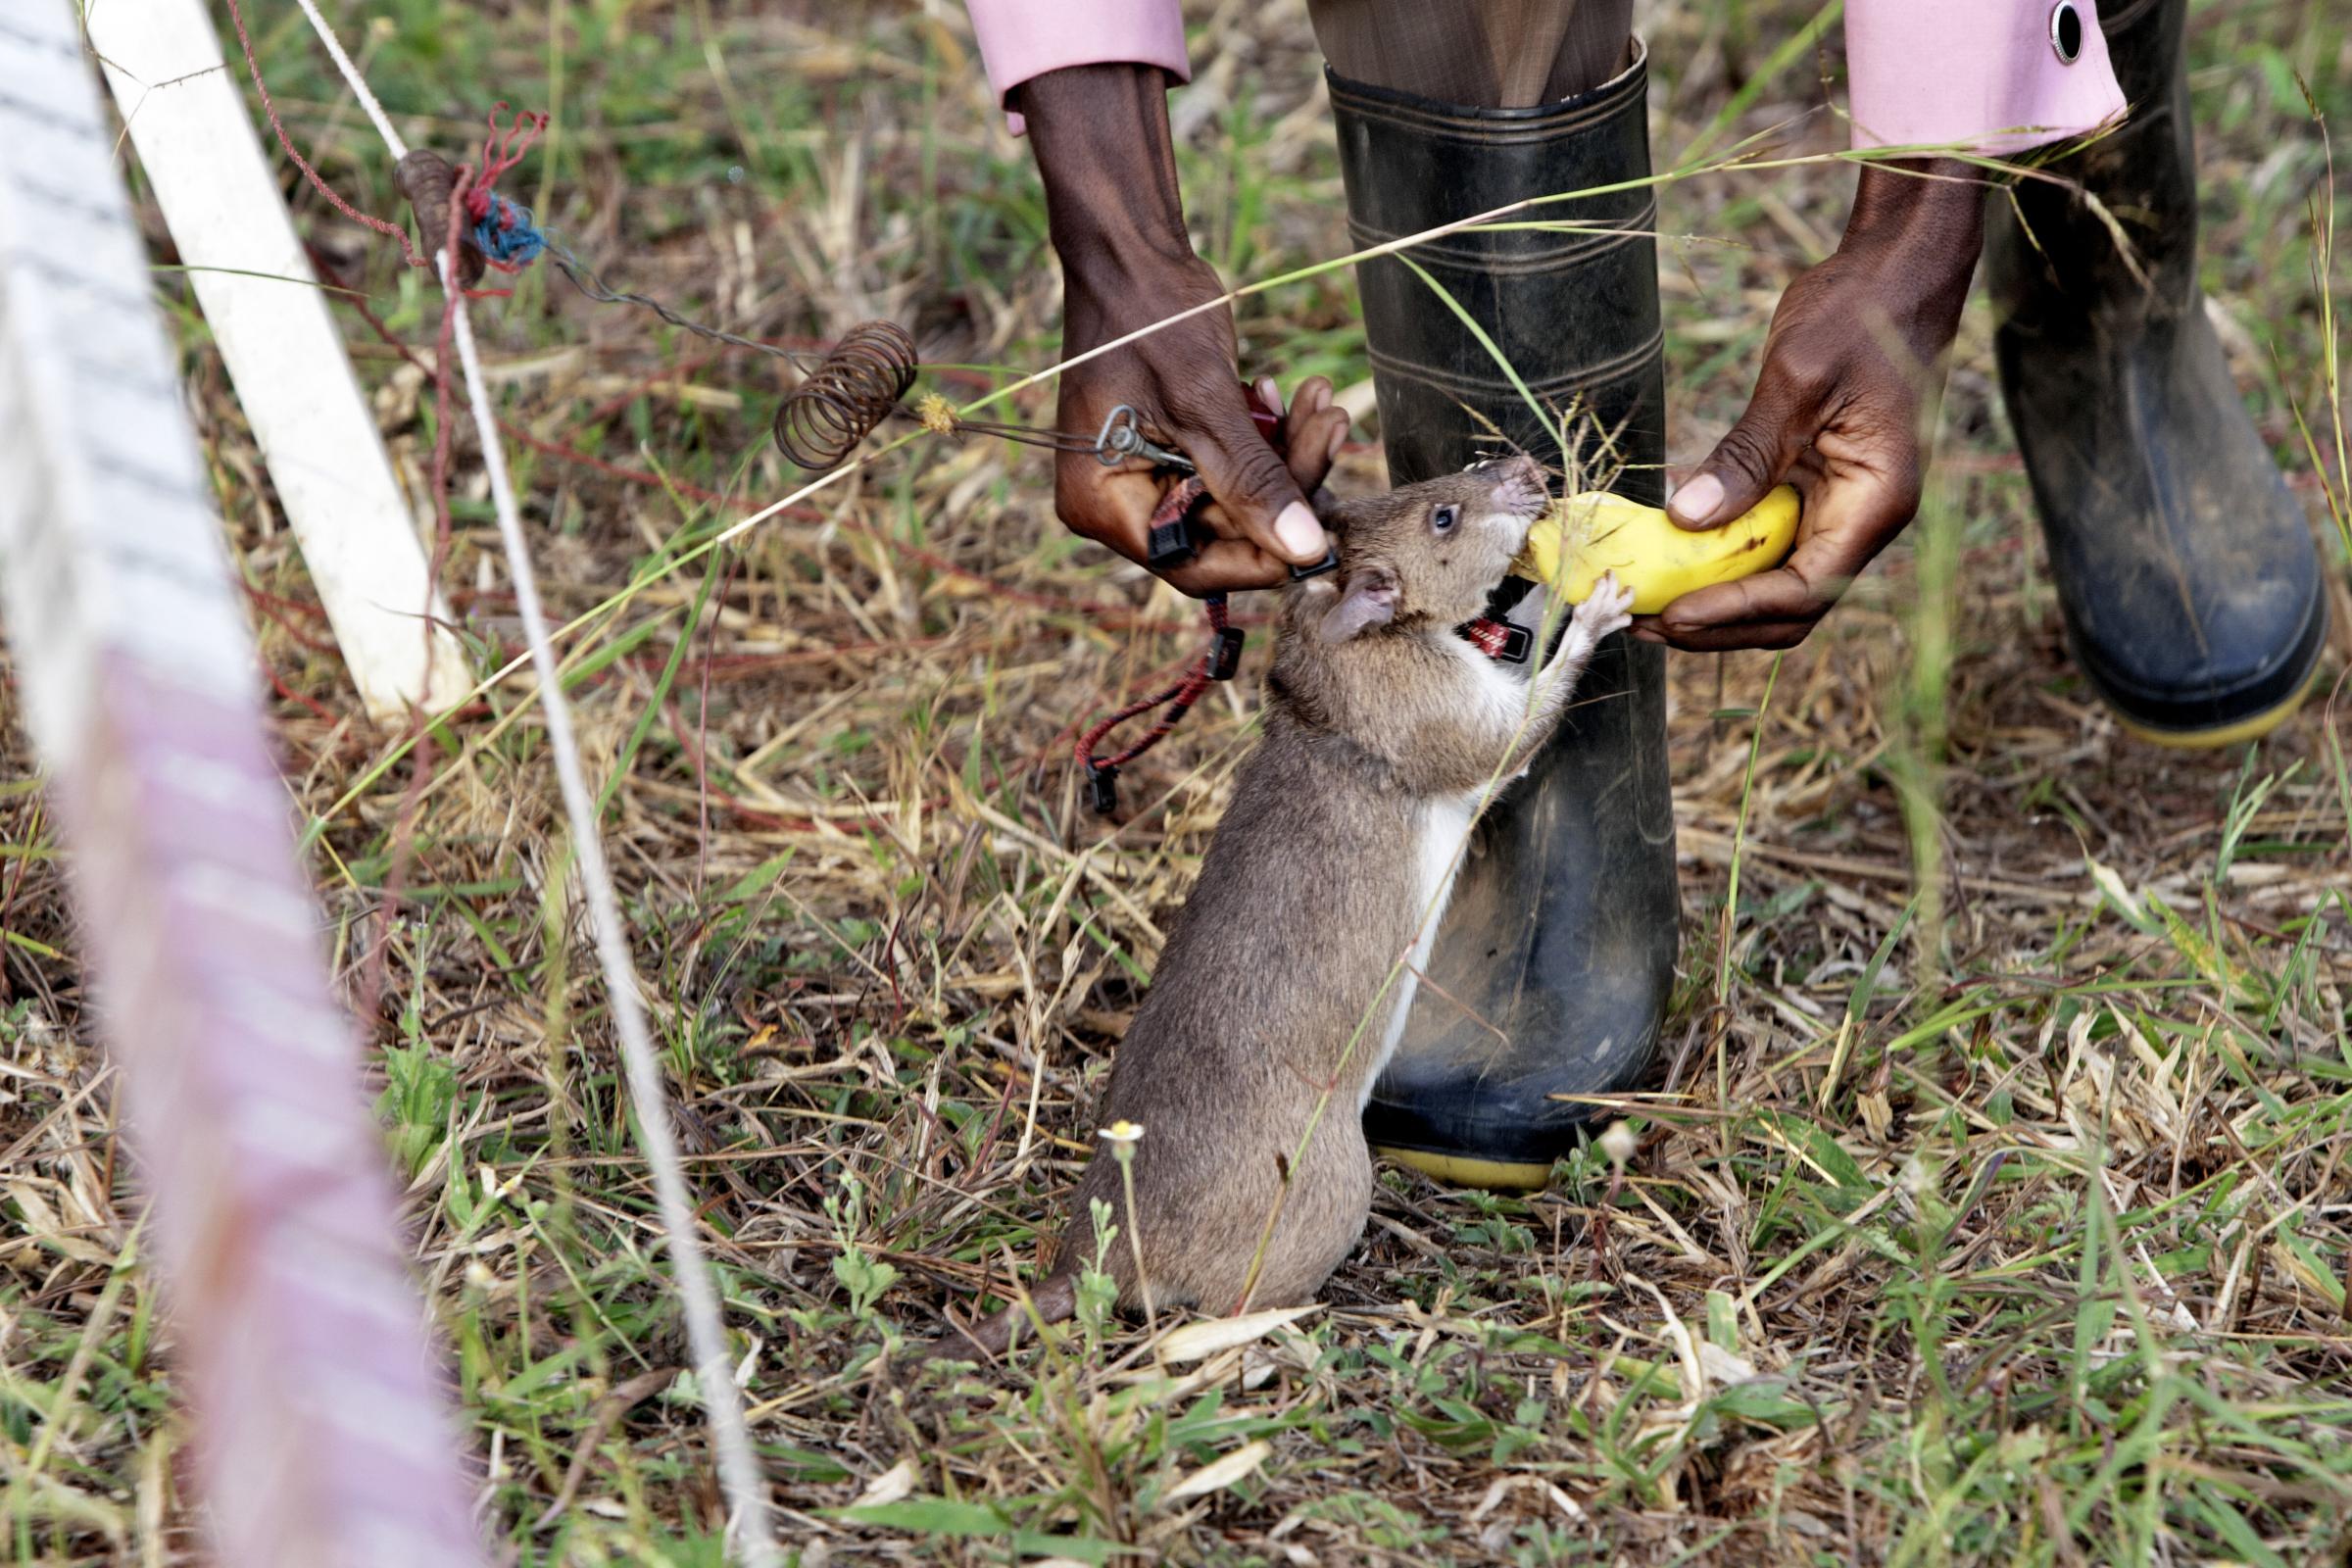 Local trainer Peter Mushi gives one of the rats a piece of banana as a reward A HeroRAT sniffs out a mine on June 20, 2014 in Morogoro, Tanzania. The rats are rewarded with a sweet or fruit when a mine or explosive device is found.